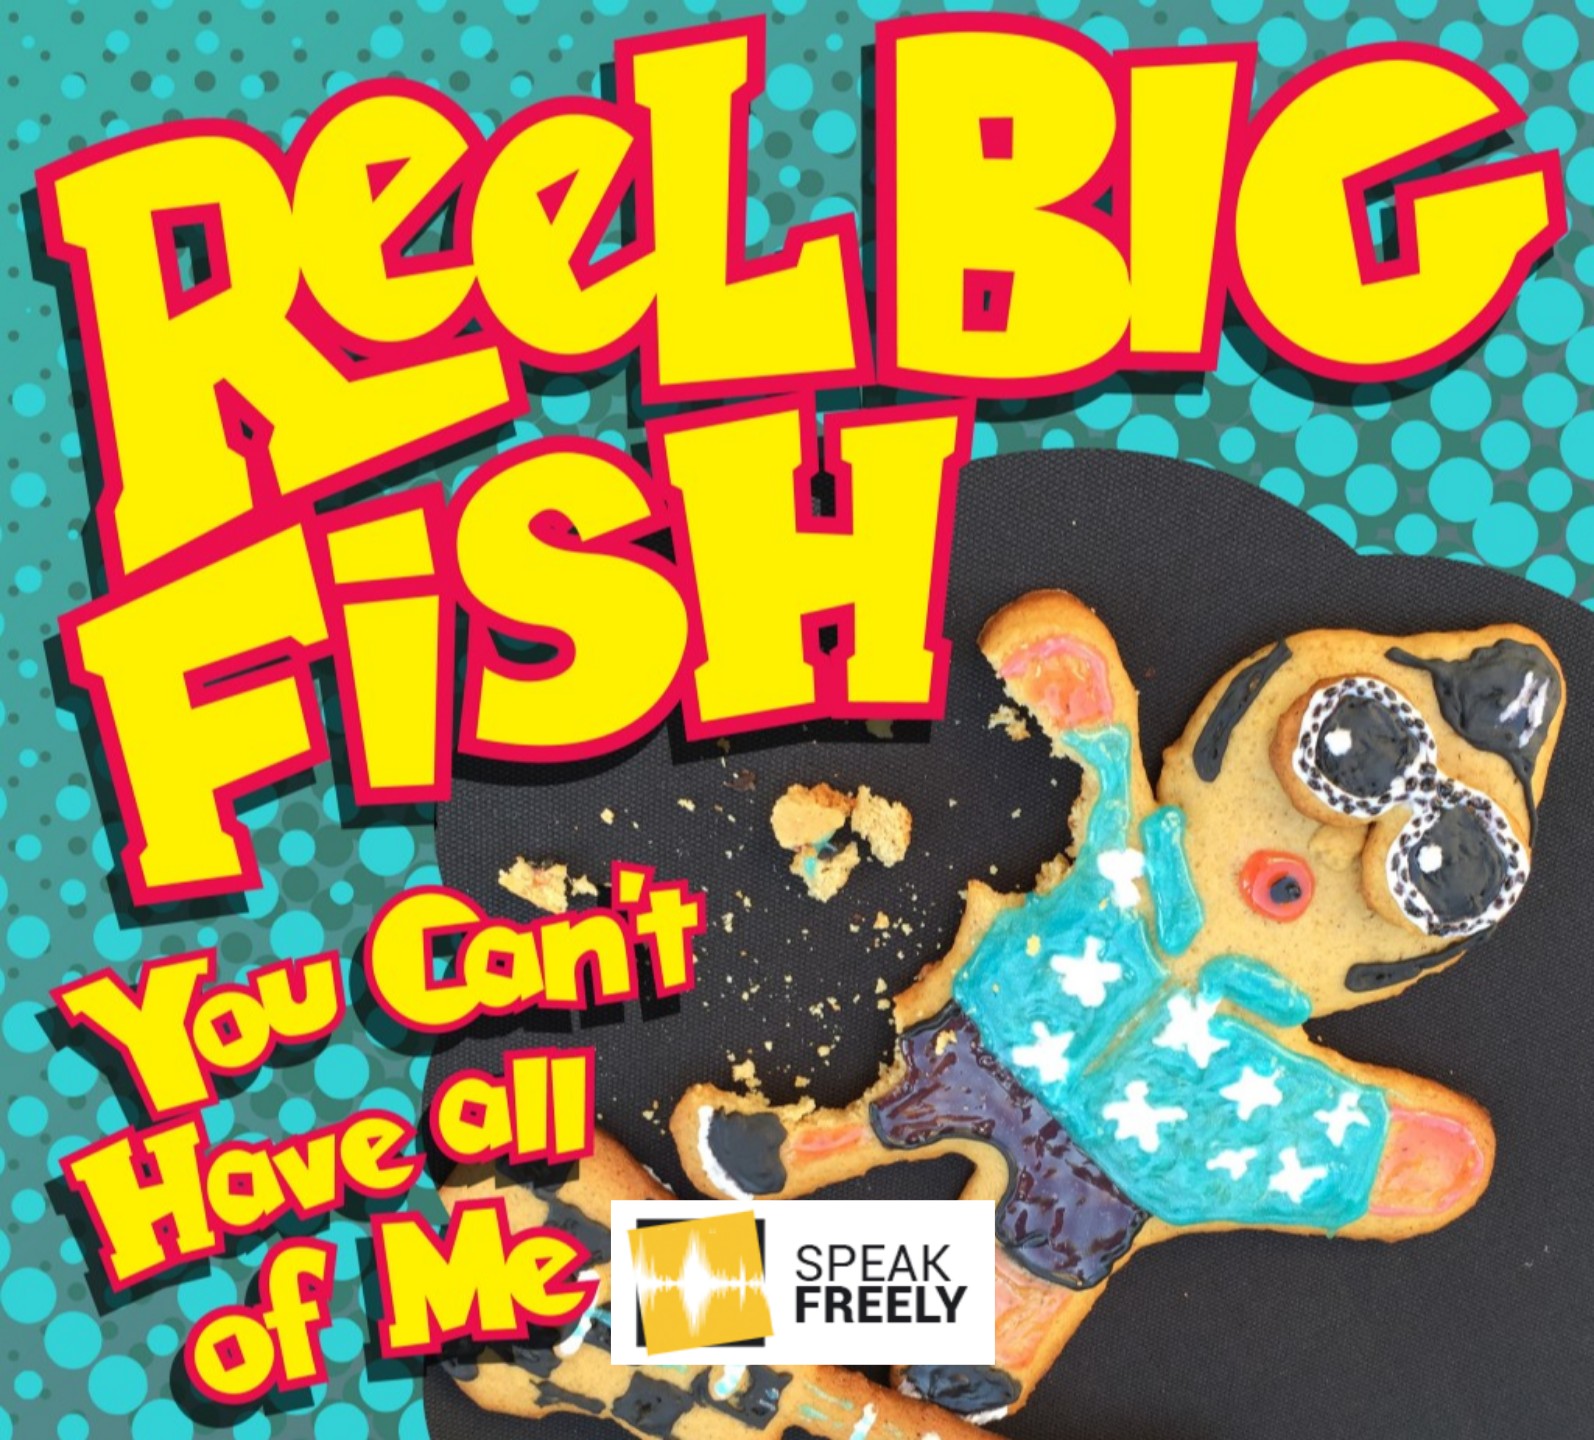 Review: 'You Can't Have All of Me' by Reel Big Fish - Speak Freely